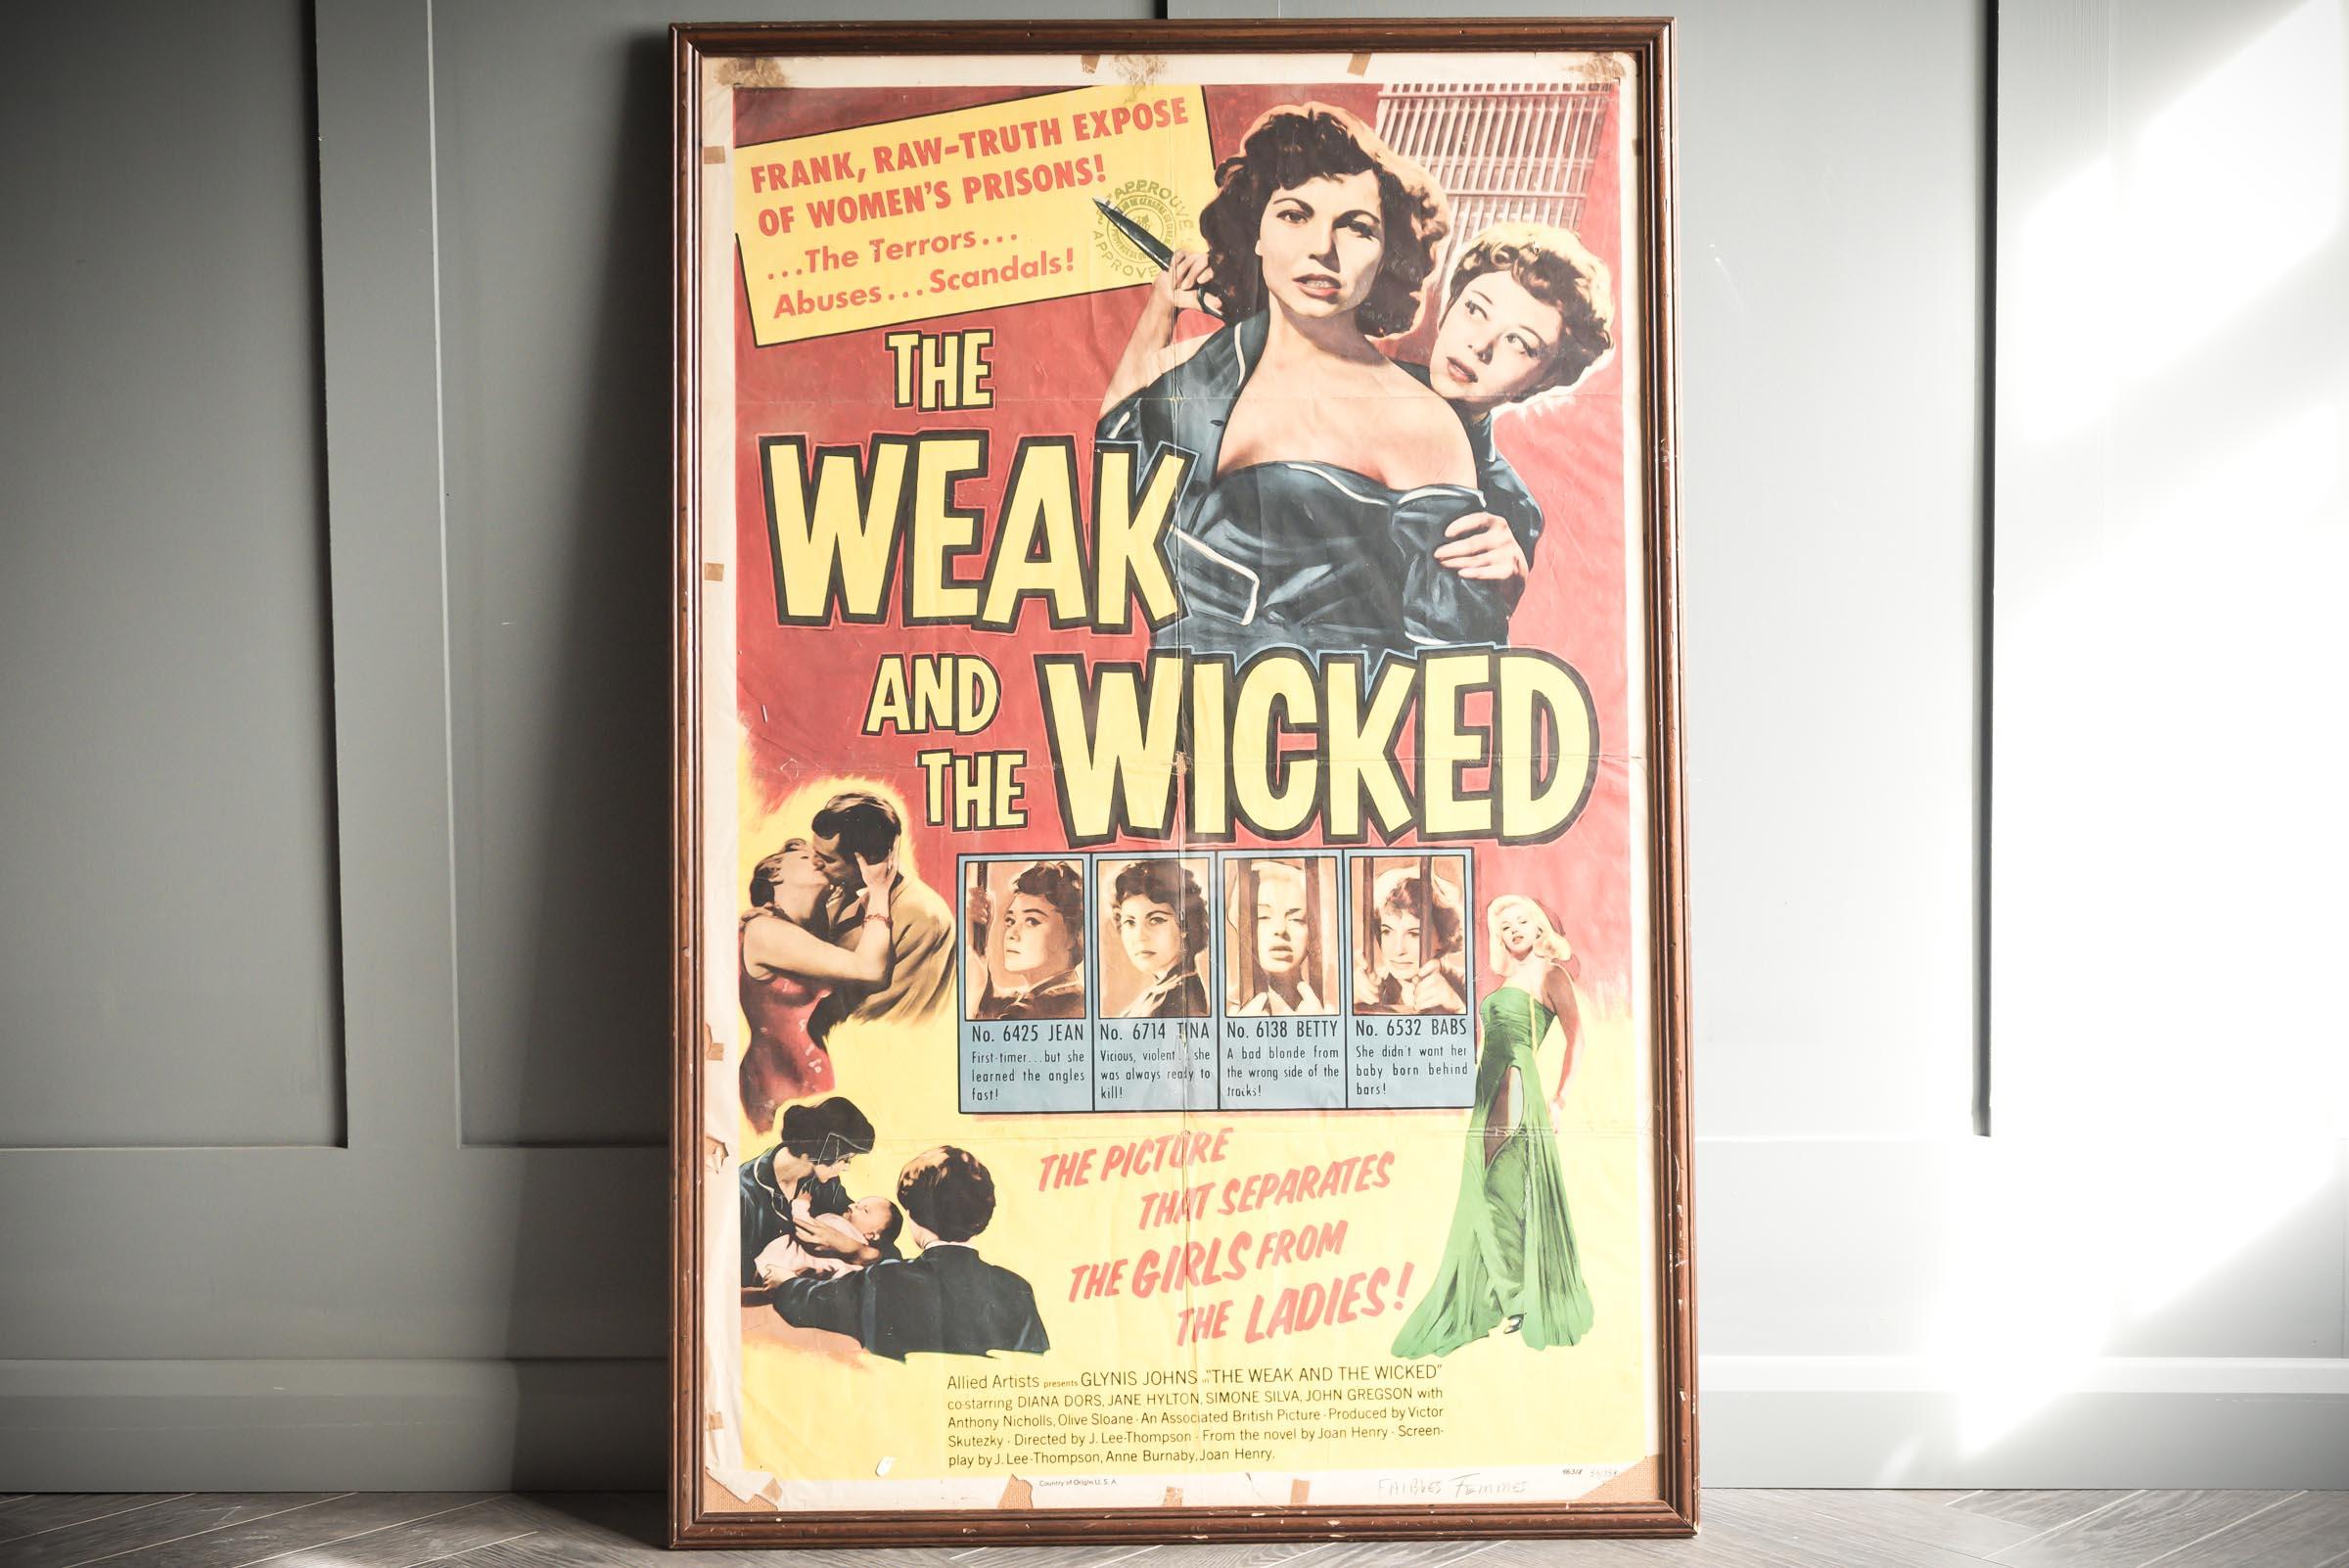 Classic film poster from The Weak And The Wicked Based on a best-selling book and prison experiences of author Joan Henry, director J. Lee Thompson's prison saga explores the life of inmates behind bars where innocence is lost in the world of vice.